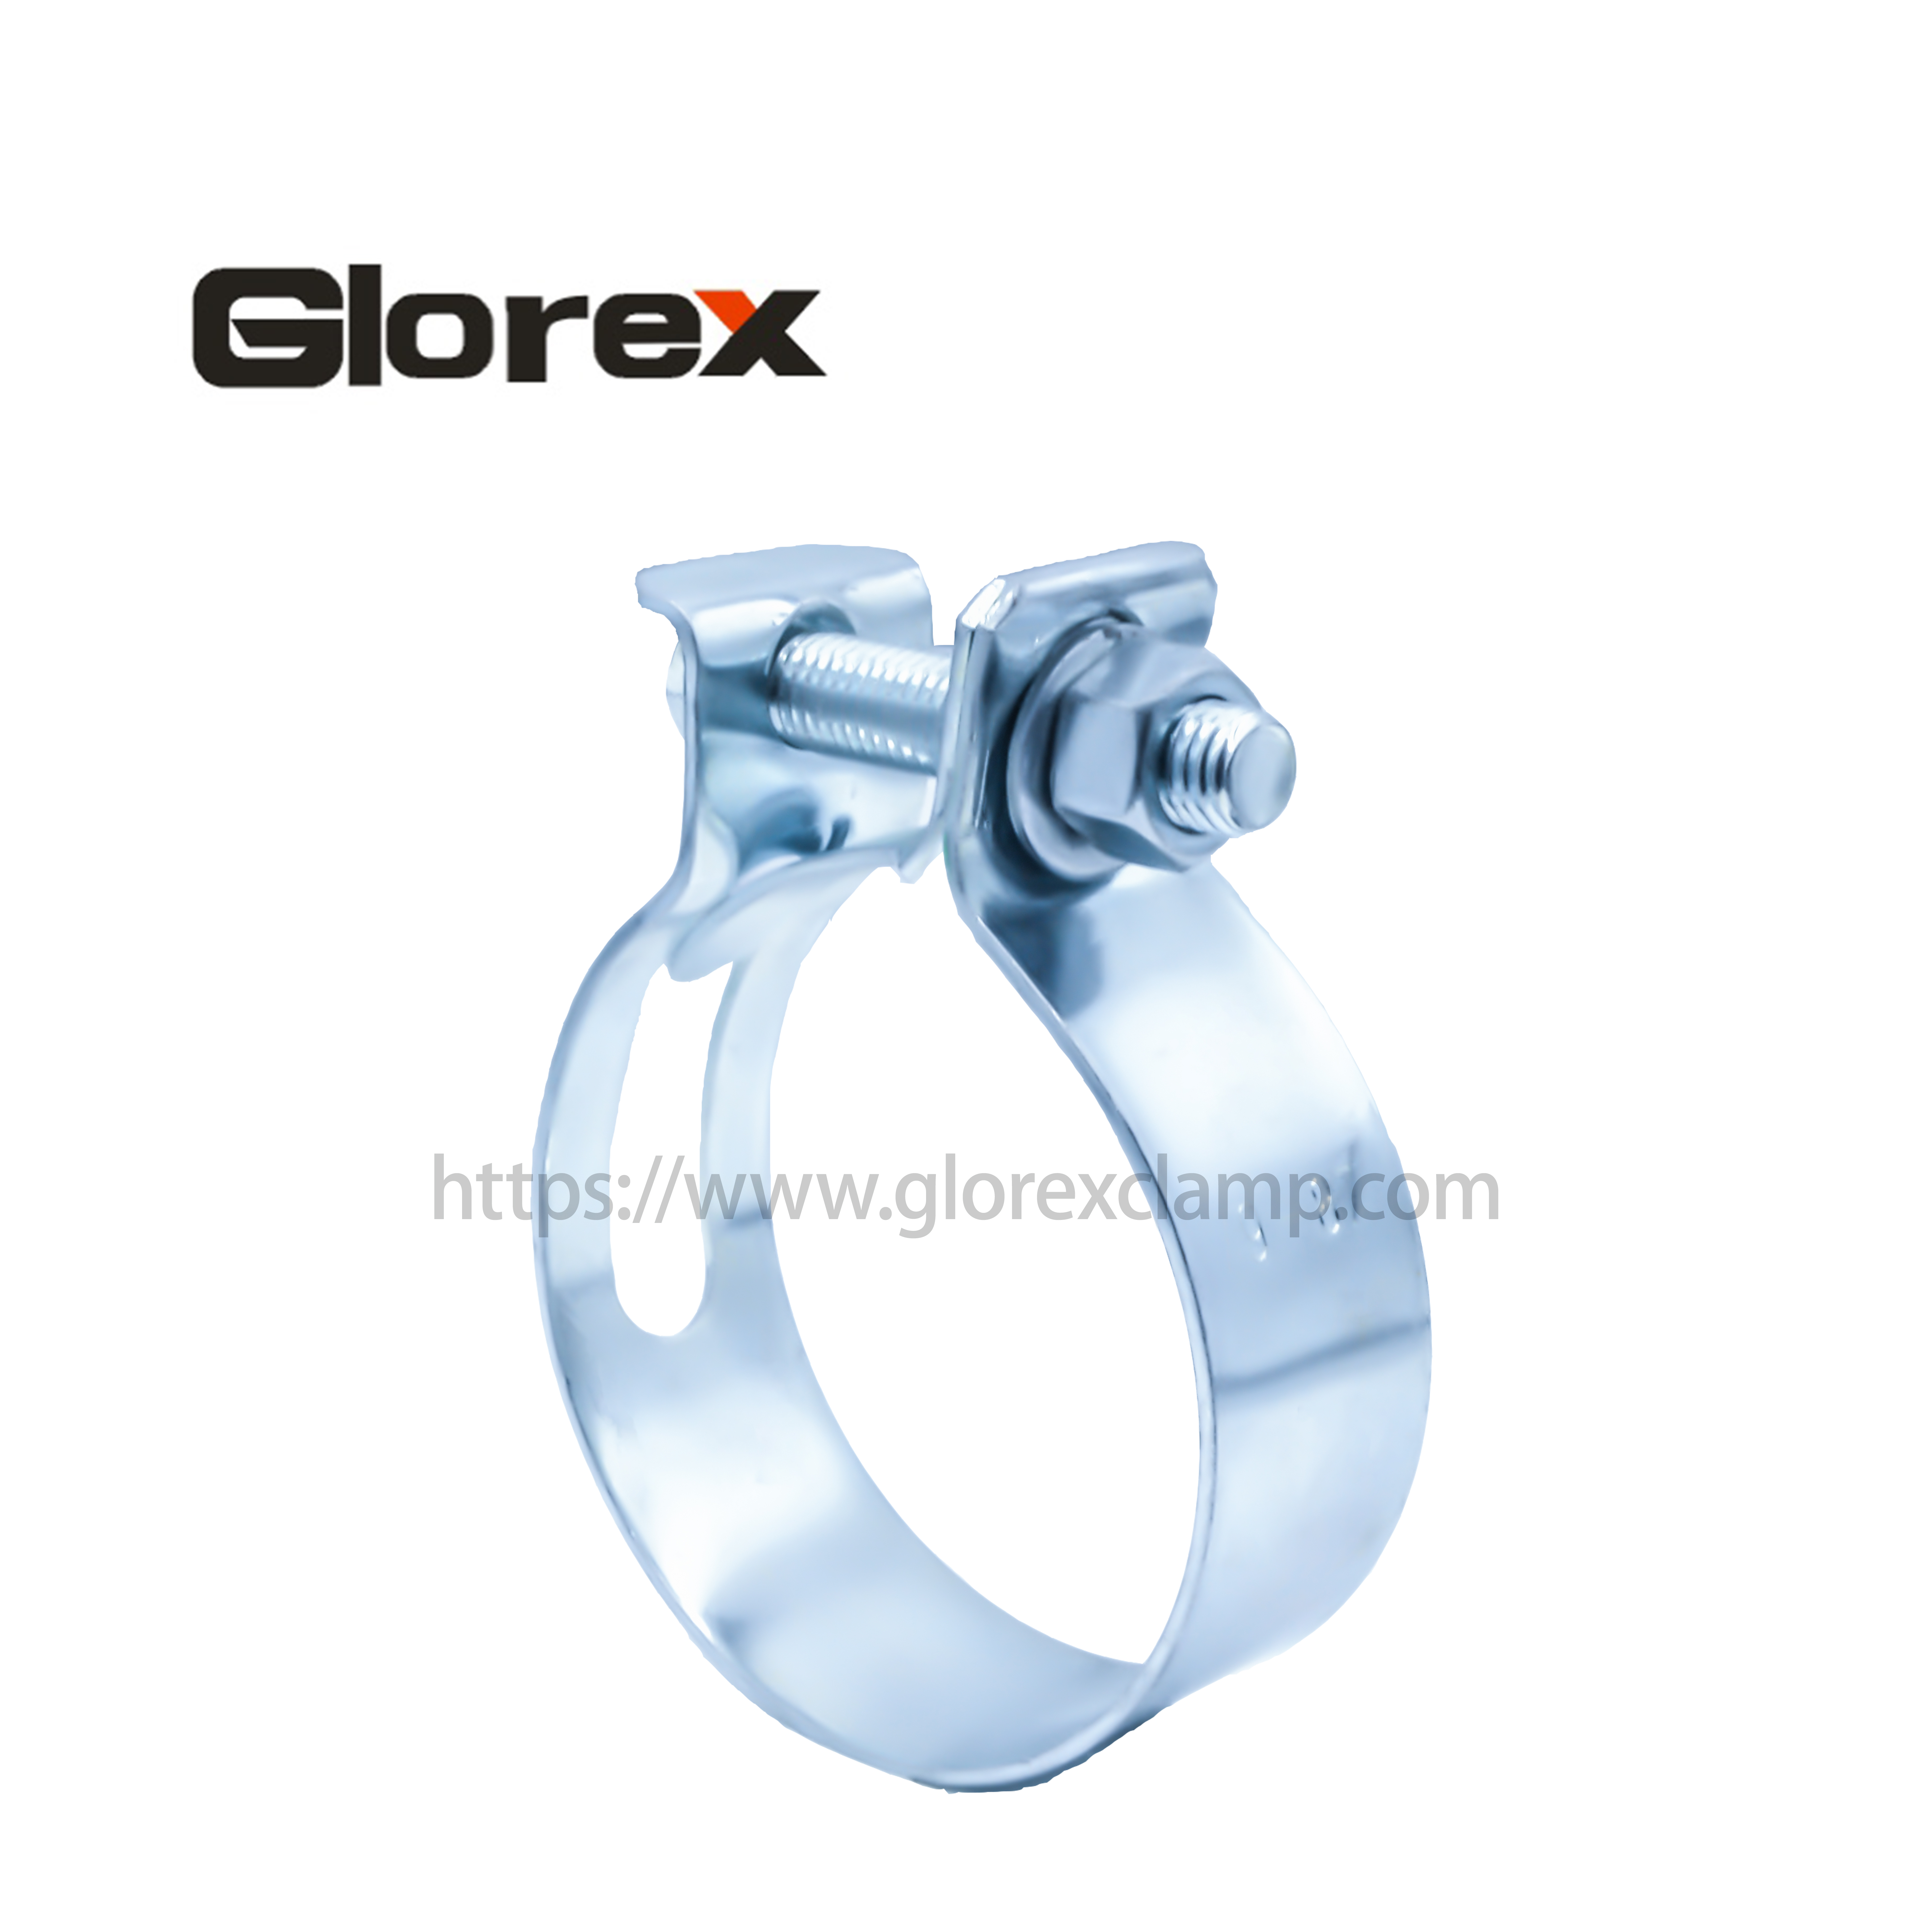 Online Exporter CPVC Pipe Clamps - The bay-type clamp – Glorex